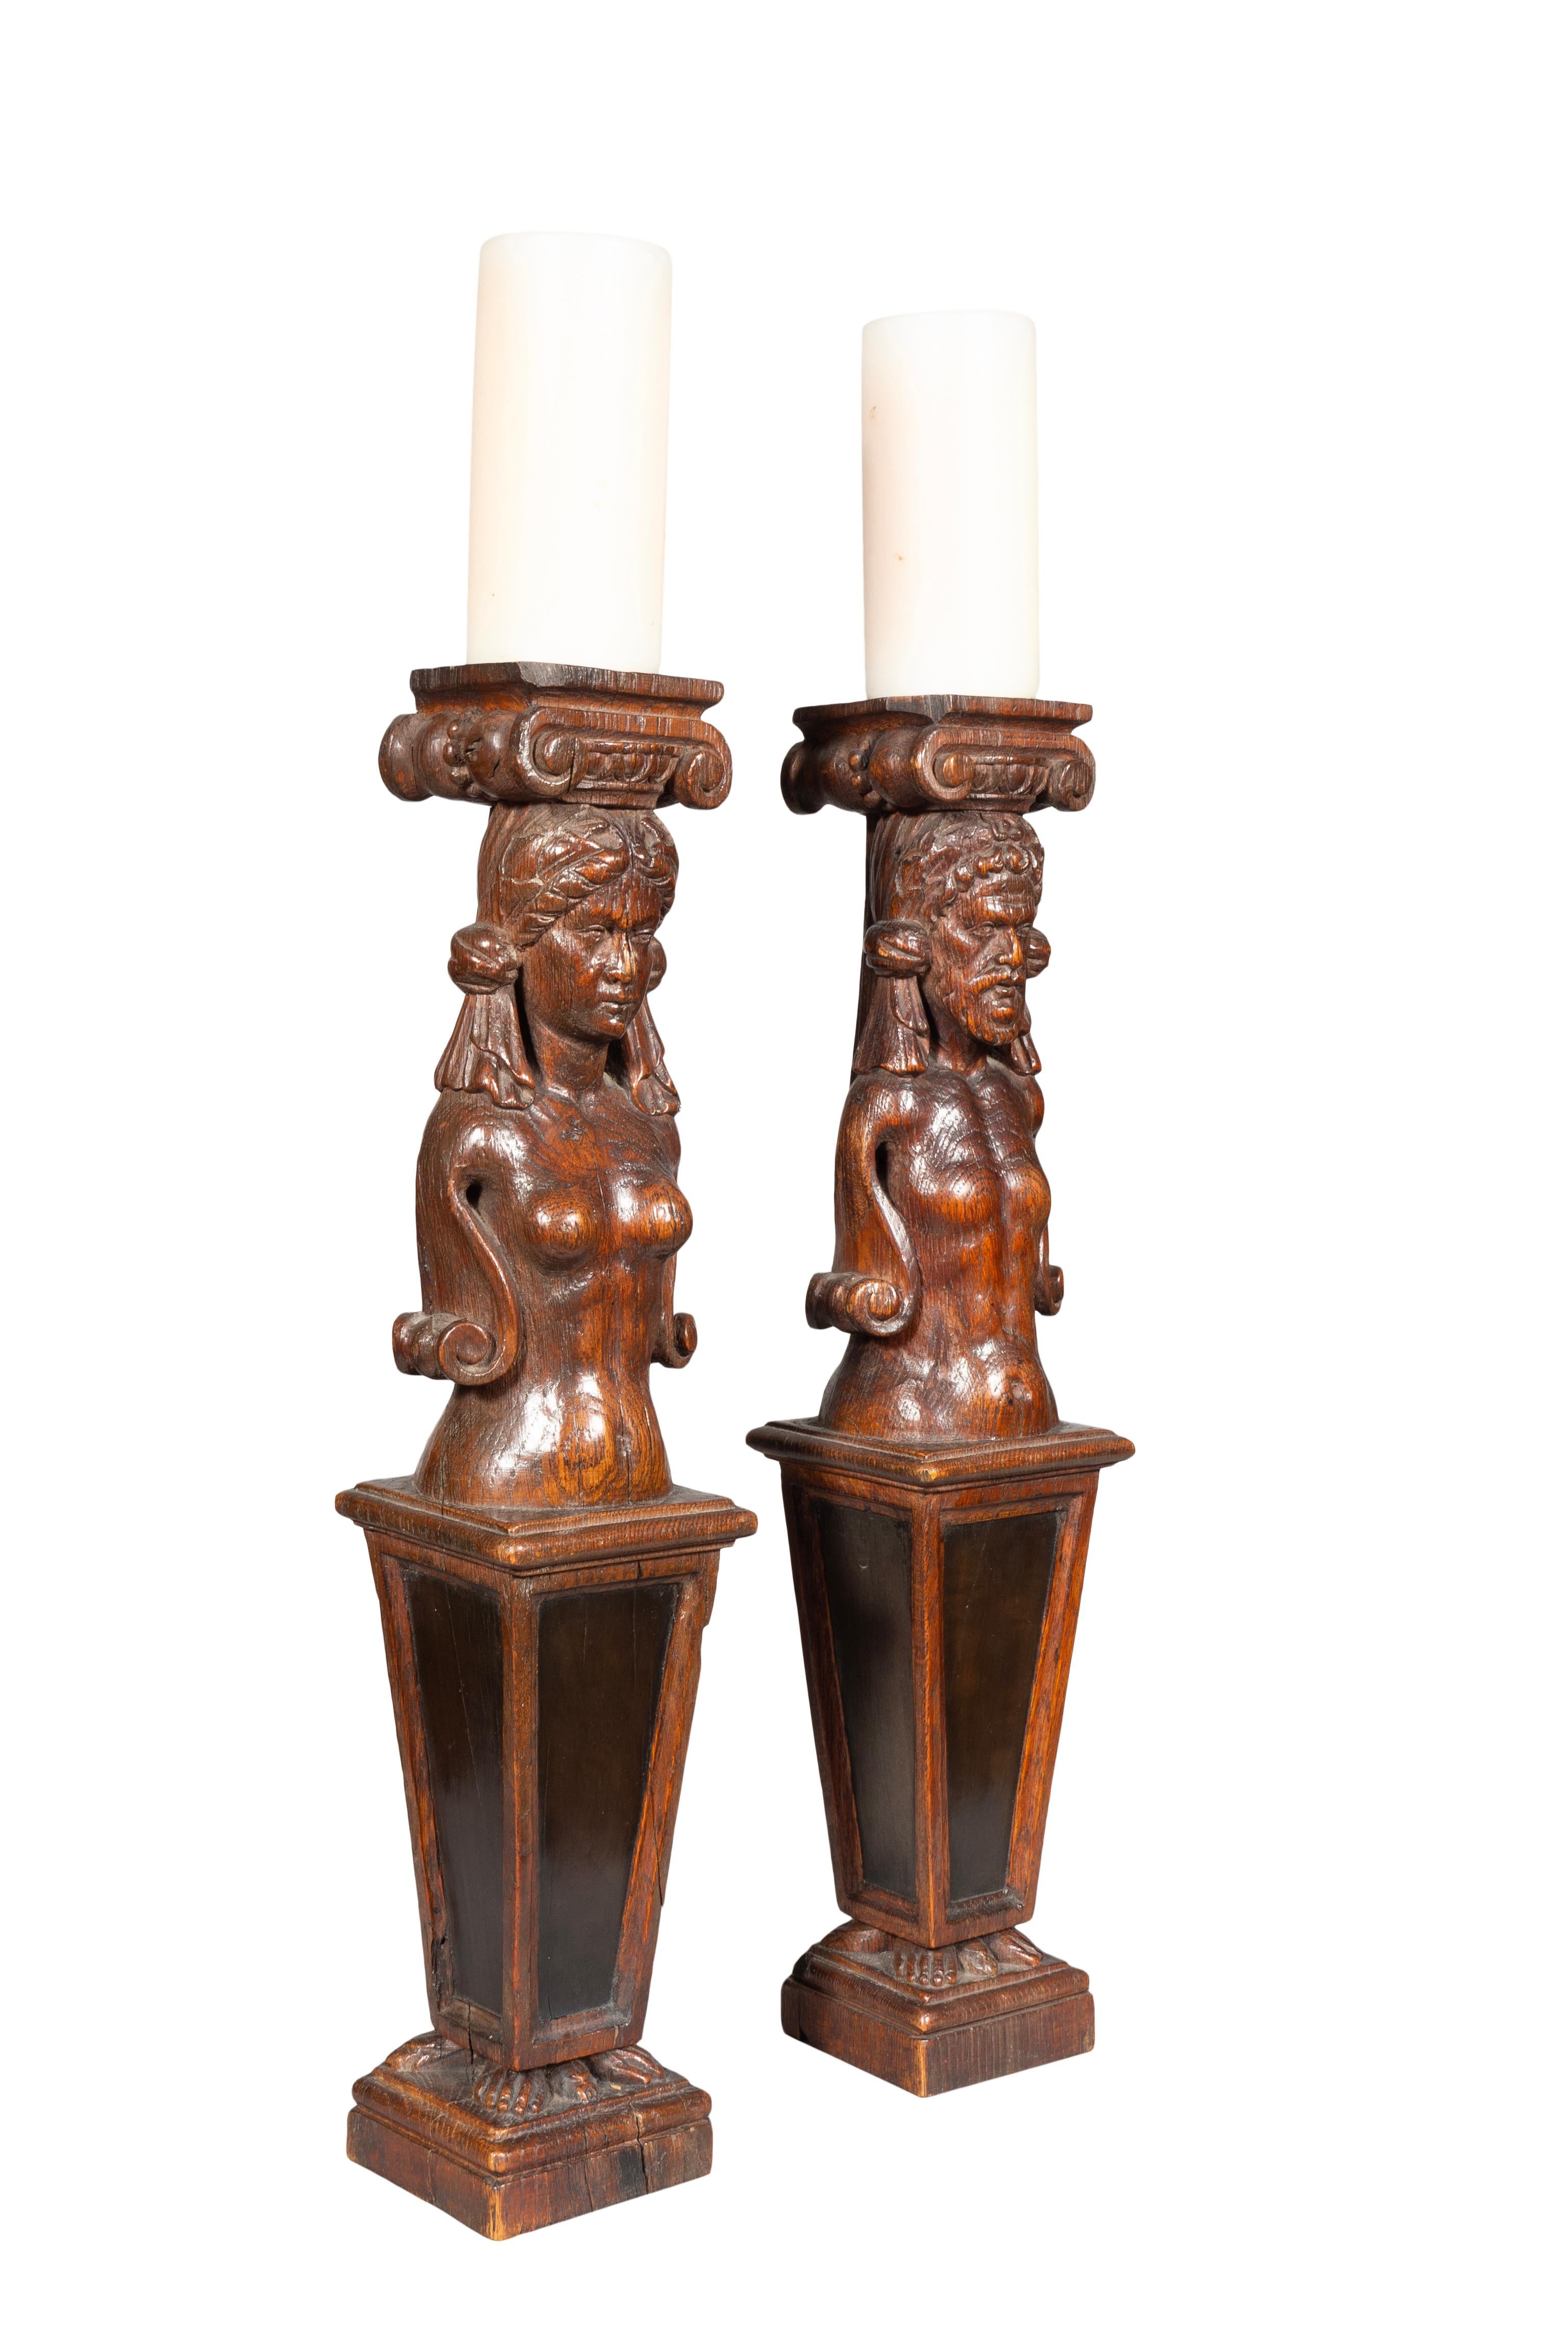 Likely from a piece of furniture. Featuring a well carved male and female over an ebony panel. Now used as candlesticks.